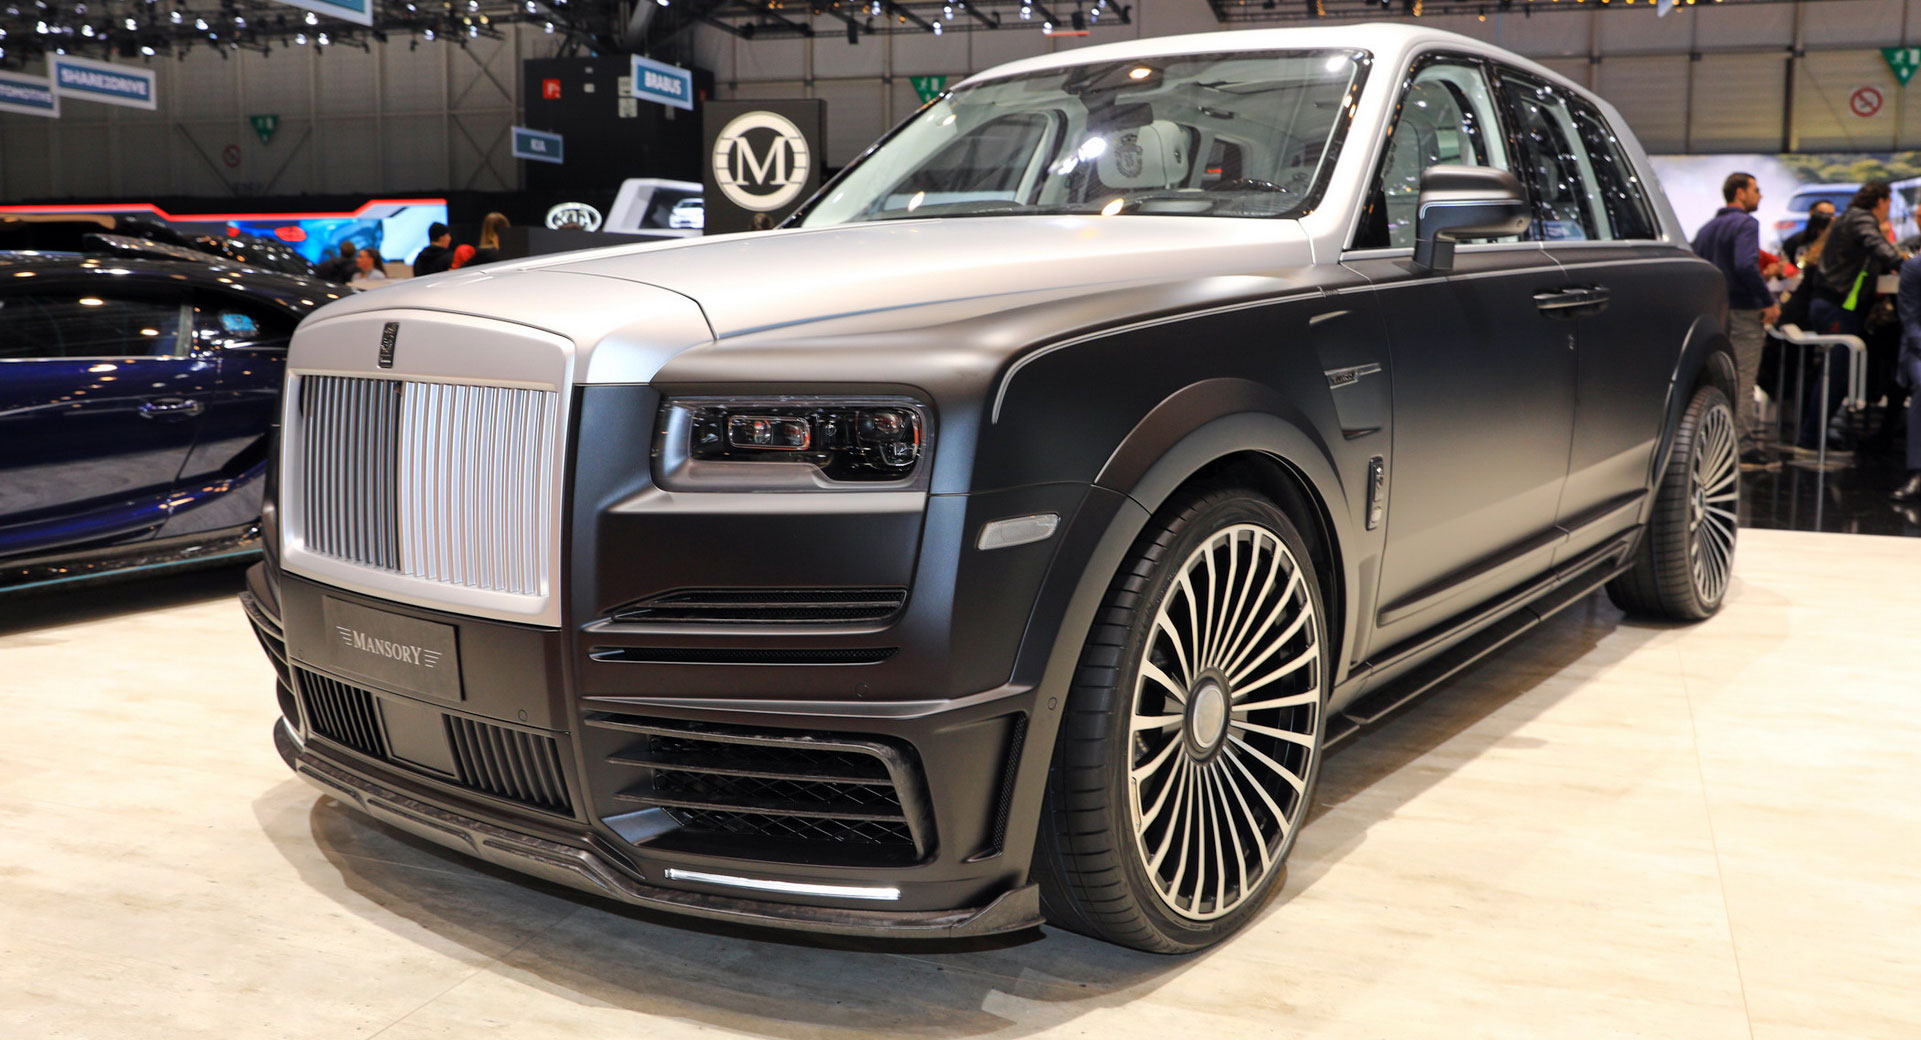 Rolls Royce Cullinan by MANSORY 2020  Interior and Exterior Details   YouTube